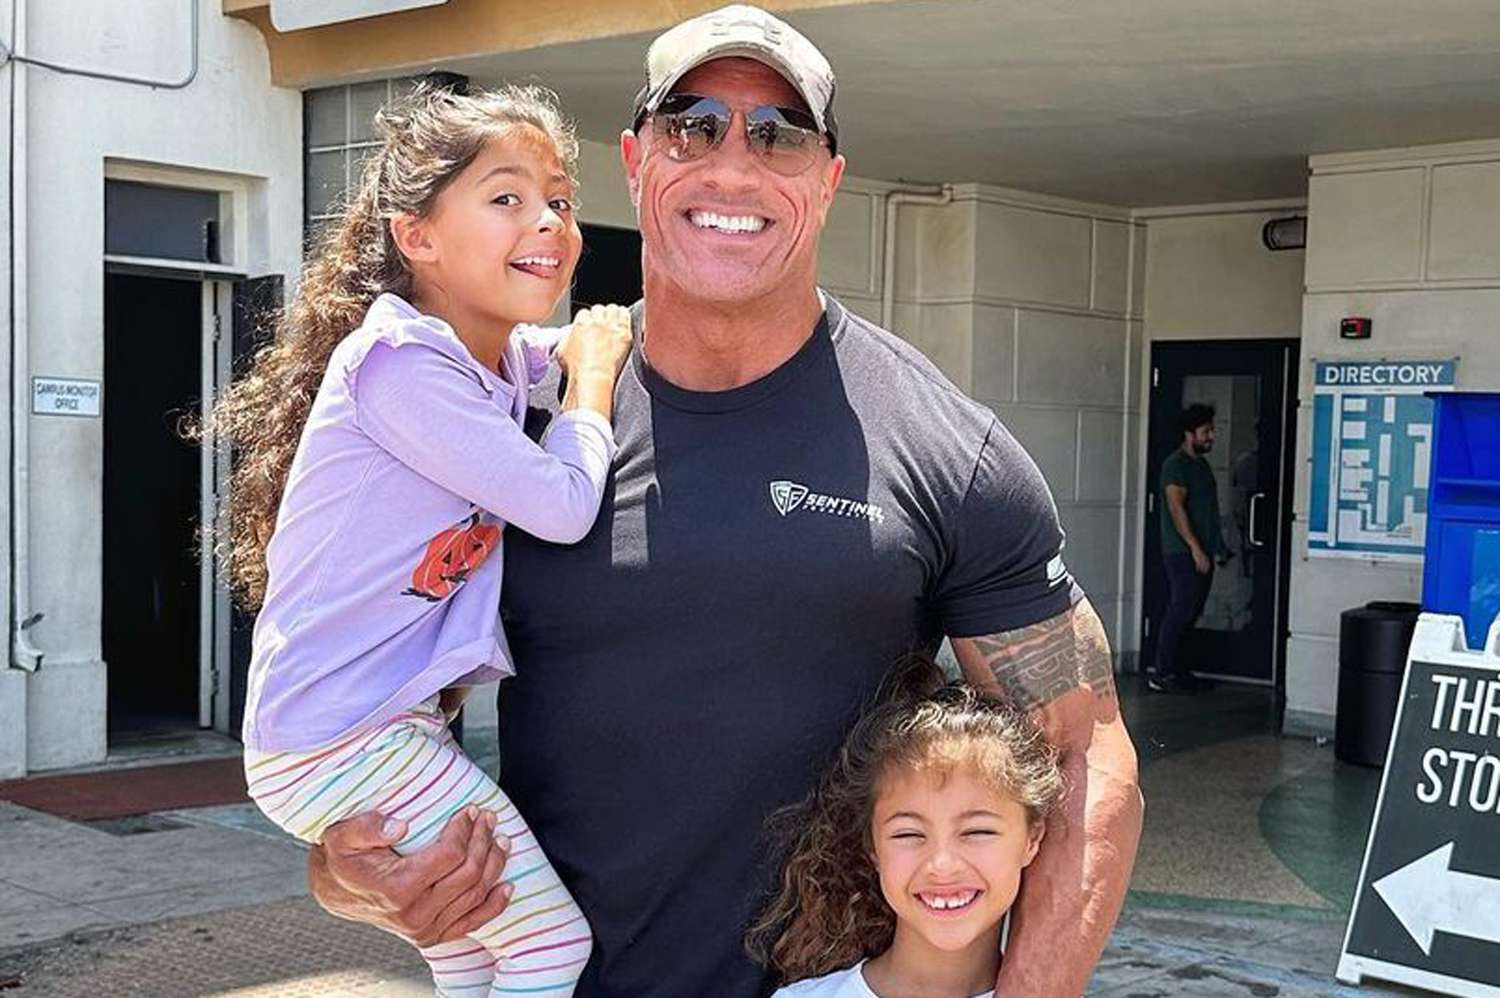 Dwayne Johnson Calls His Daughter His 'Greatest Motivation' as He Wraps “Moana 2”: 'Most Comforting Inspiration'